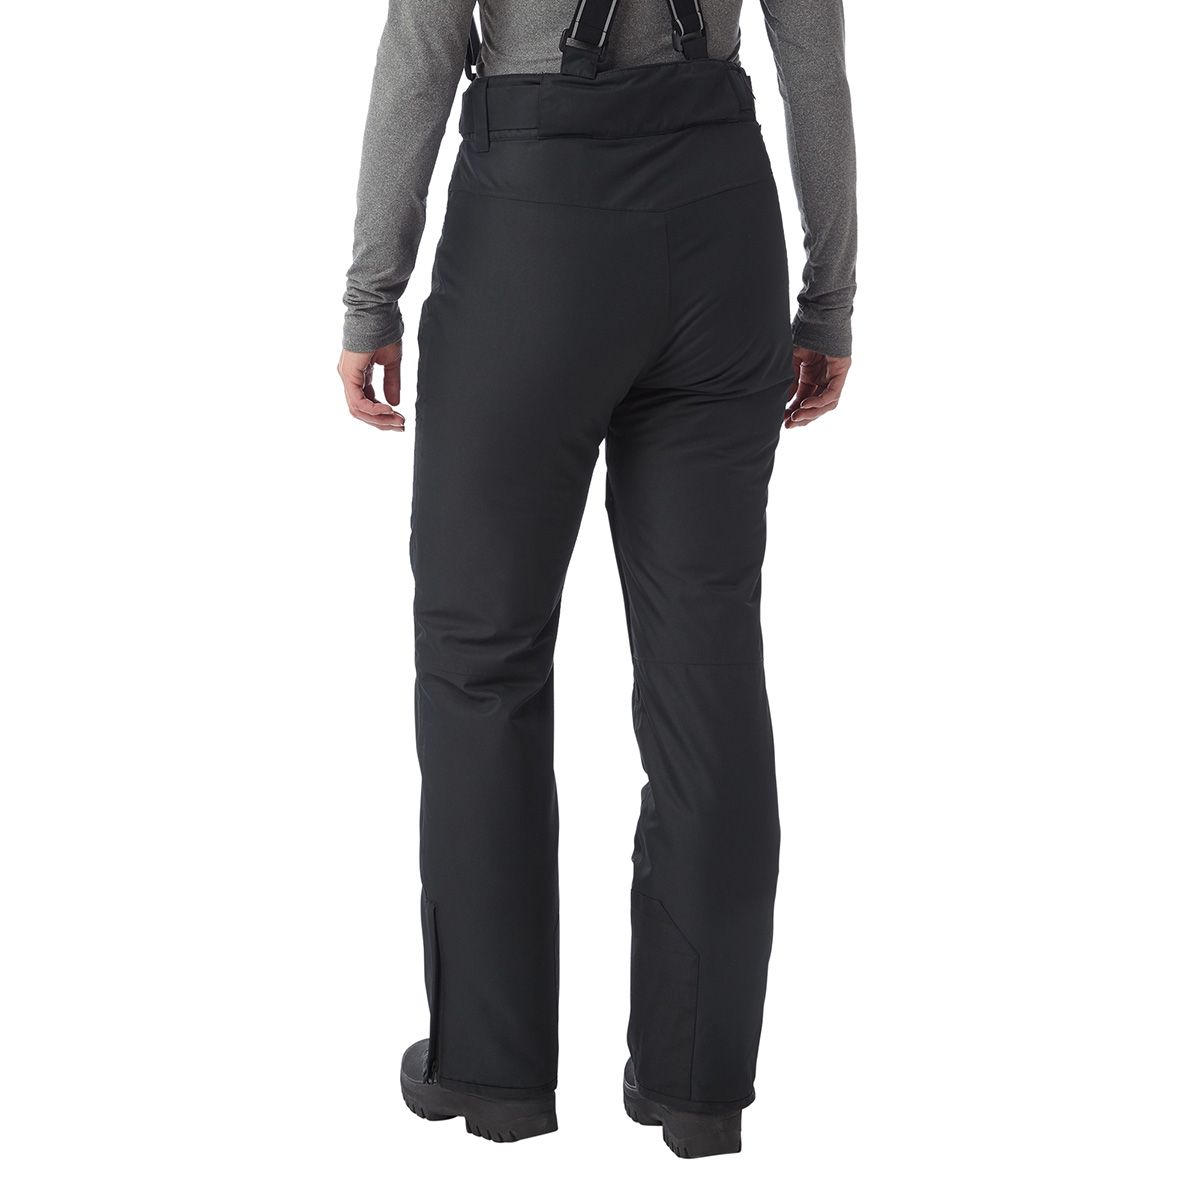 Practical ski wear without the sky-high price point. These snug salopettes offer waterproof and breathable performance with reliable insulation and sleek, ergonomic design. The legs feature reinforced panels, snow gaiters, articulated knee darts and soft tricot patches plus inner thigh zip vents for comfort. Complete with adjustable, detachable braces.